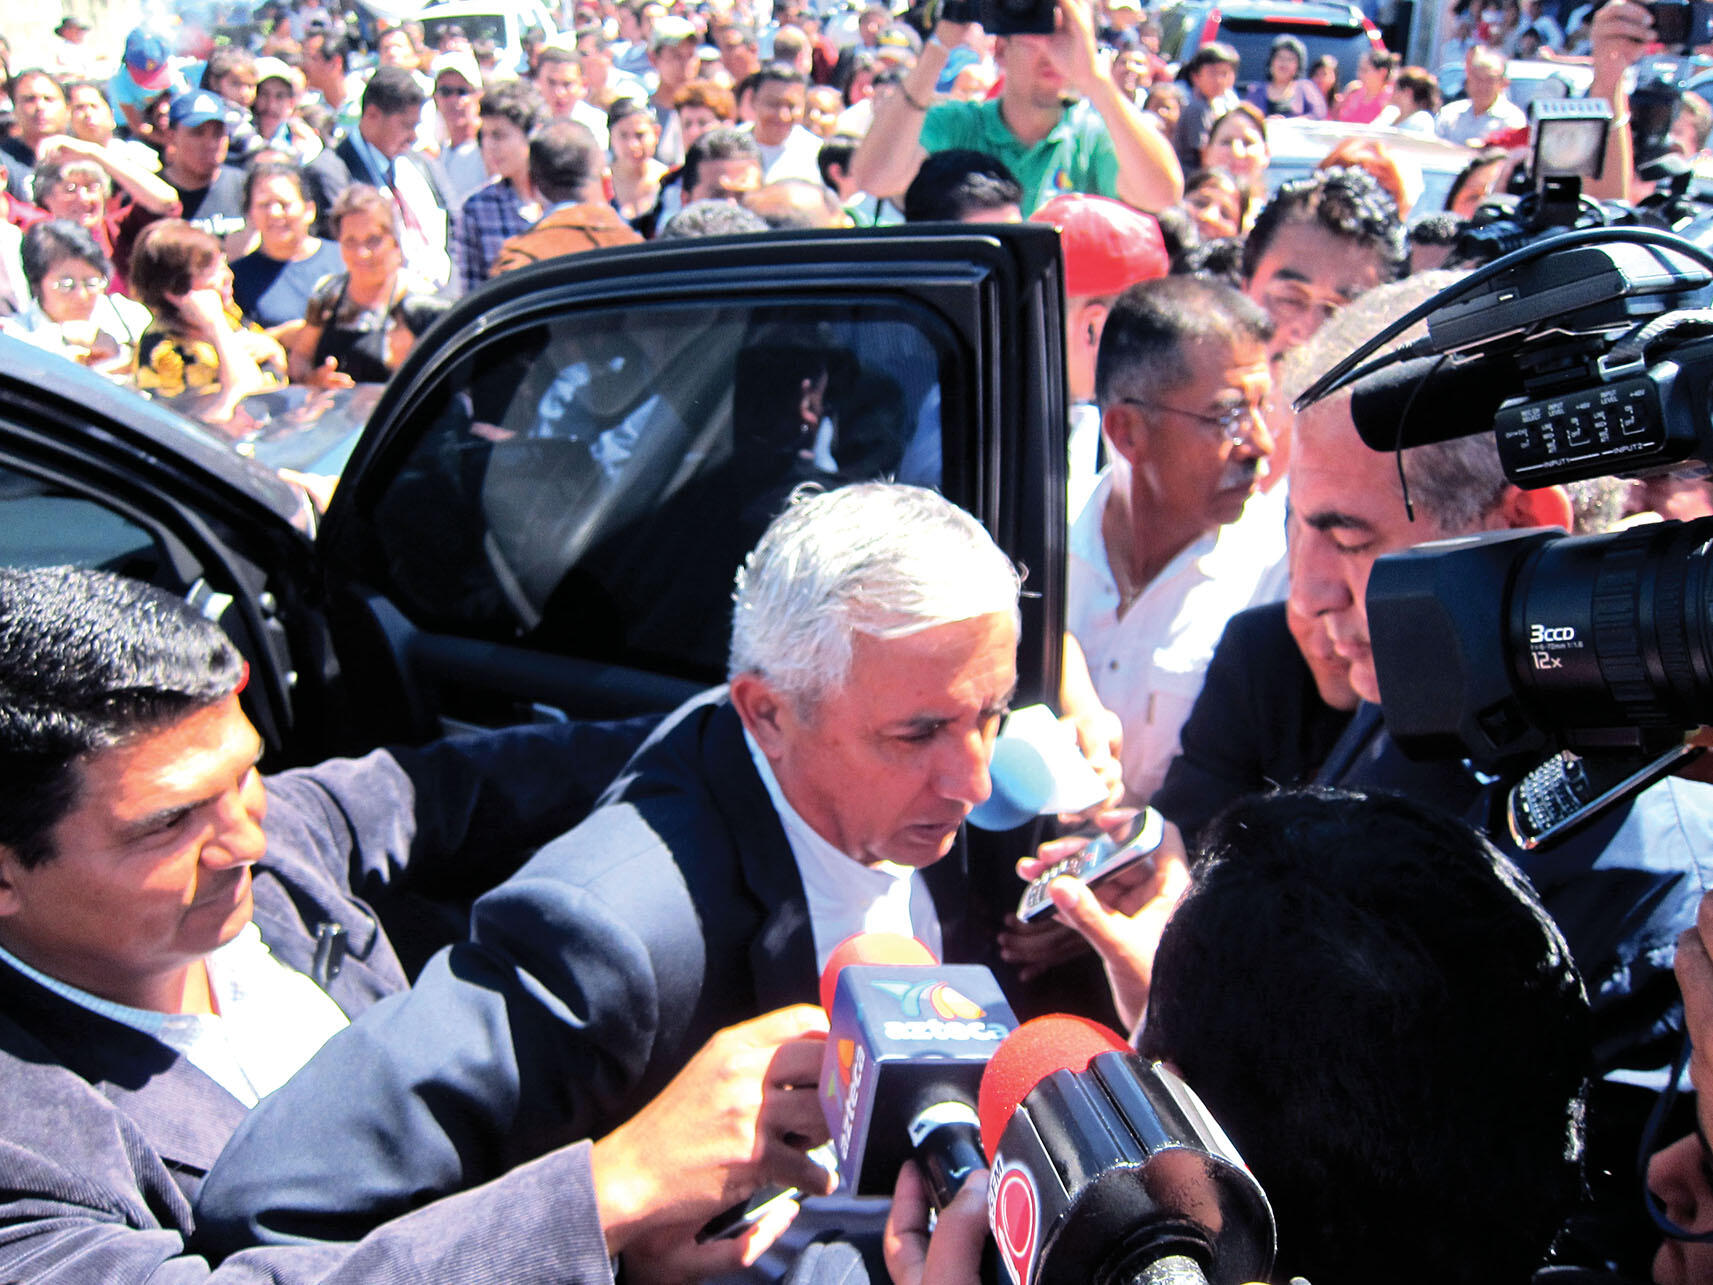 Otto Pérez Molina exiting a car in a crowd on election day. (Photo by Anthony Fontes.)